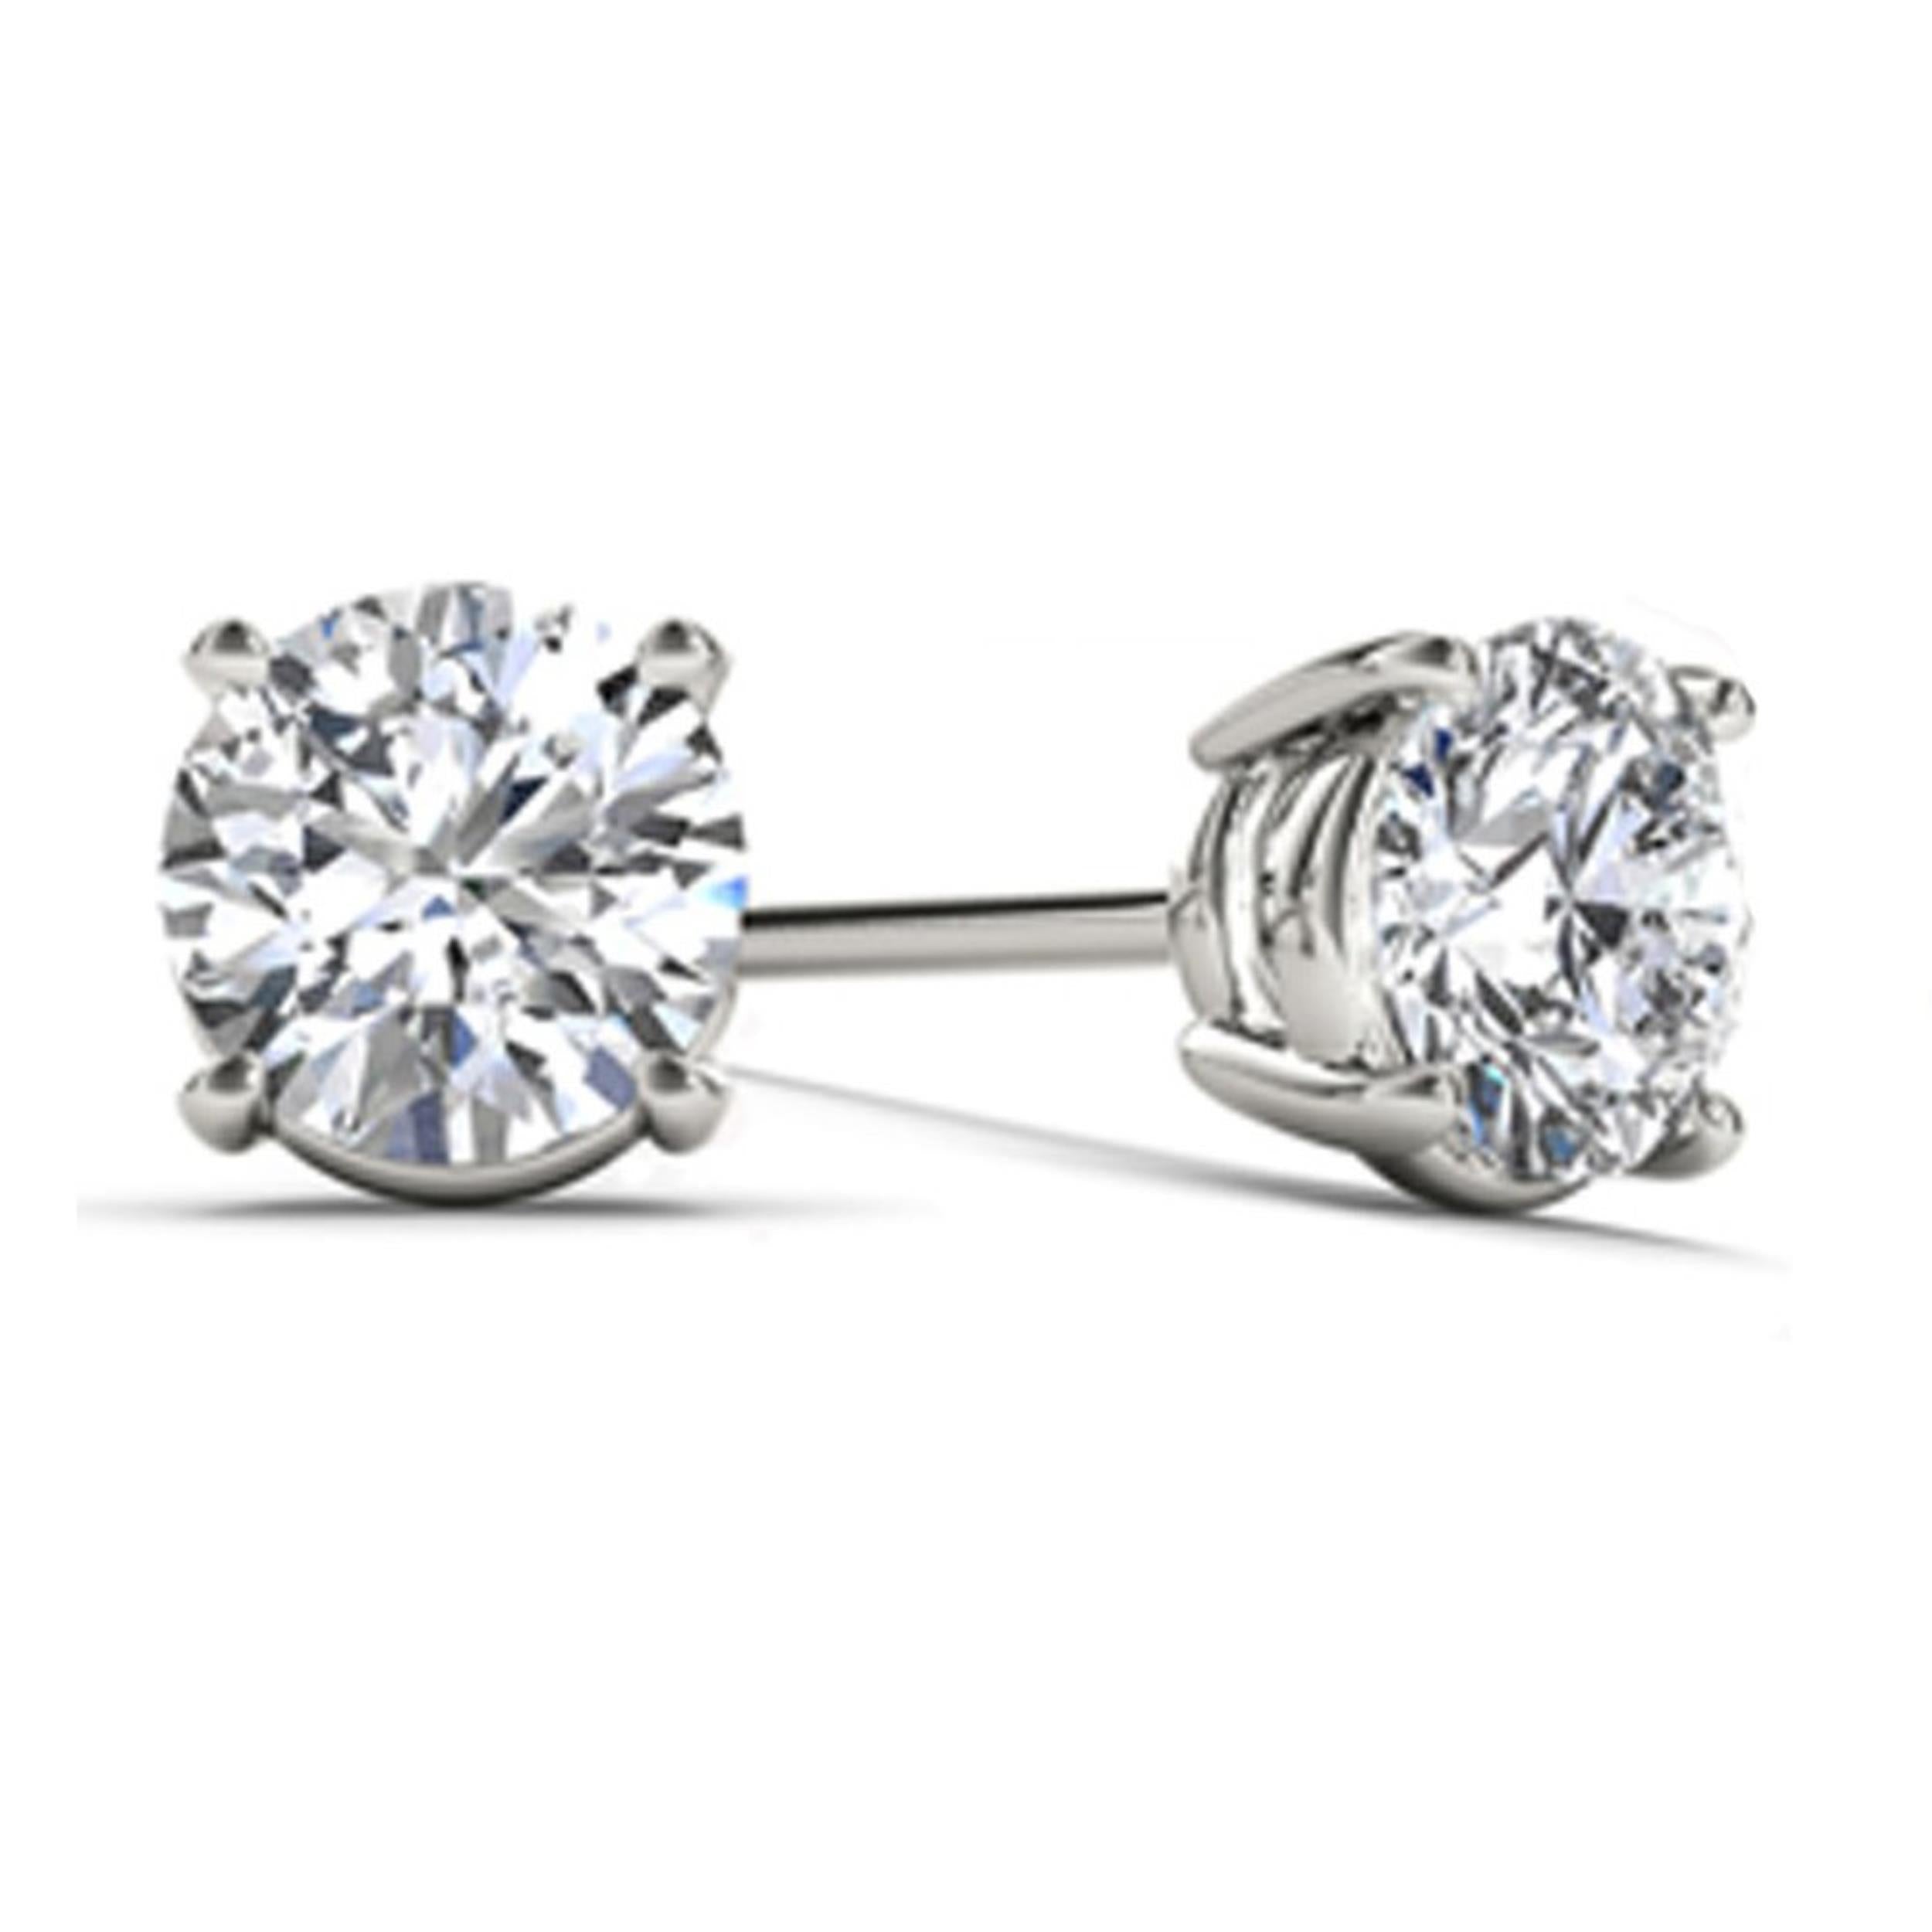 14Kt White Gold 1 Ct Genuine Natural Diamond Round Stud Earrings